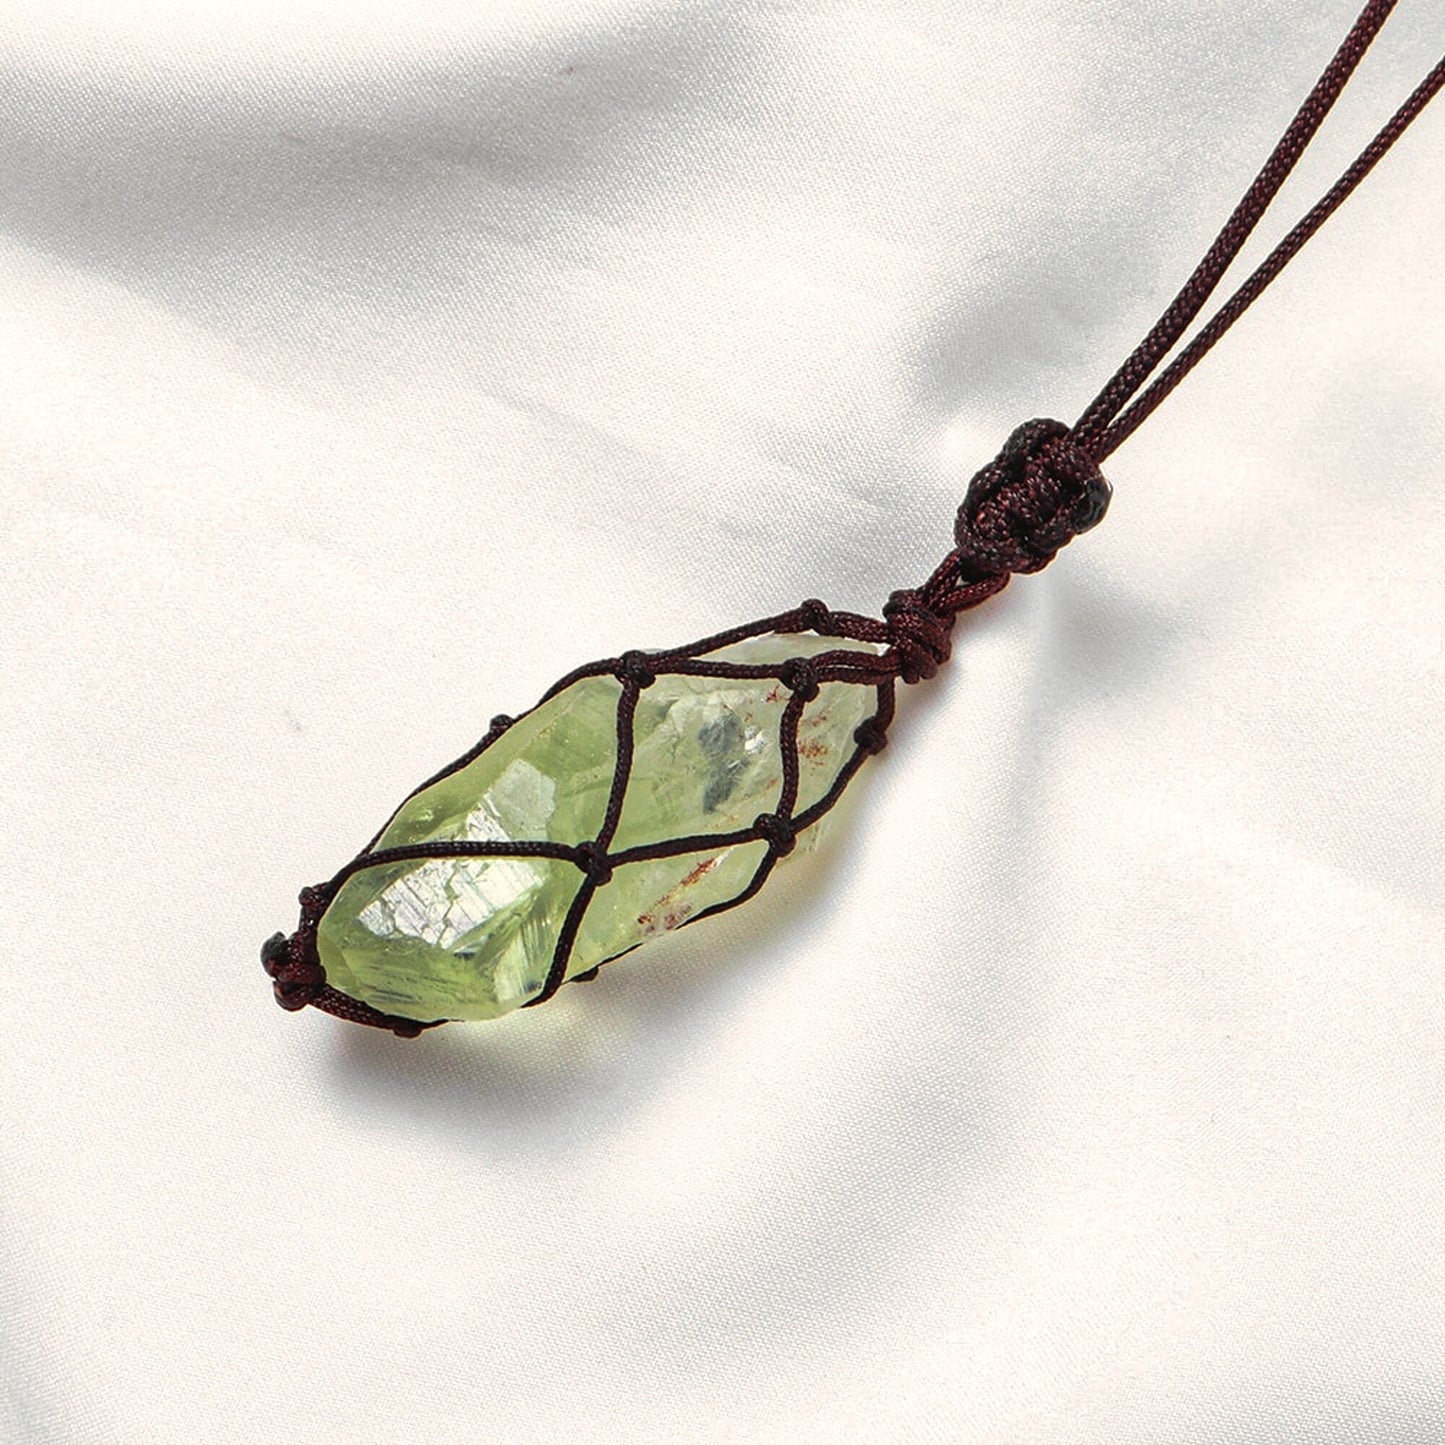 Hand-Woven Green Crystal Quartz Necklace with Adjustable Natural Net Bag Pendant - Vintage Women's Jewelry